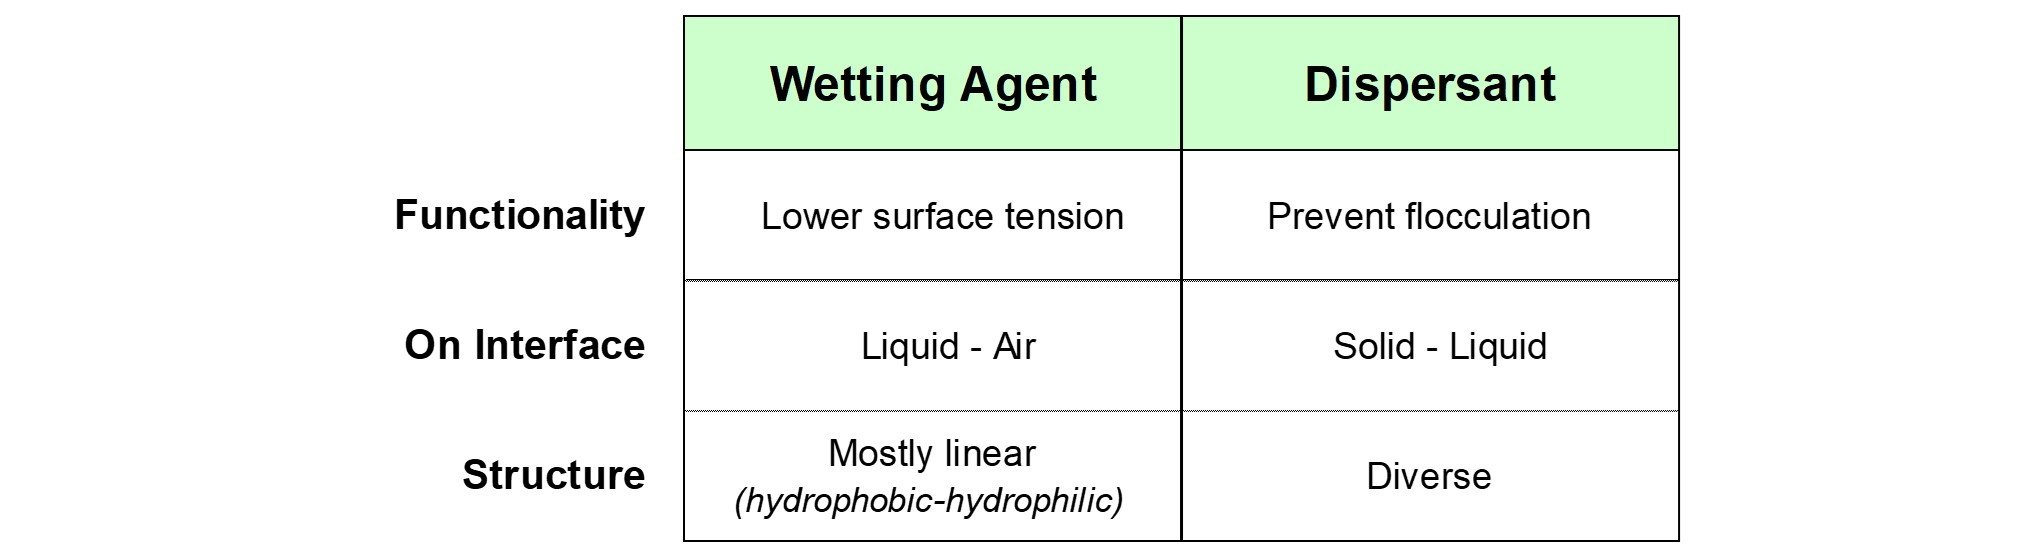 Key differences between wetting agents and dispersants.